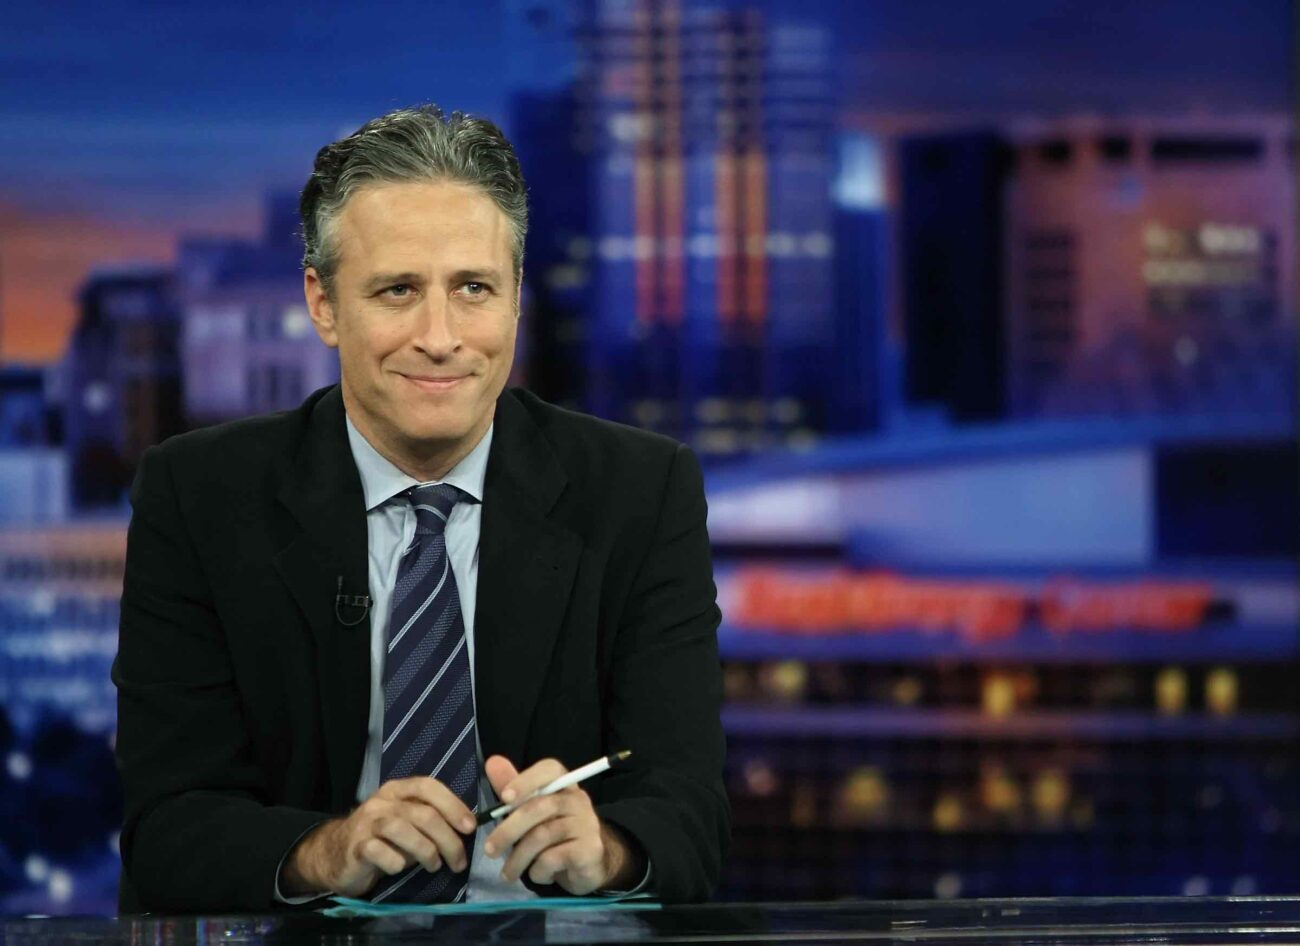 Beware Arby's. Jon Stewart is coming back to the anchor's chair. Hear all about his new show after 'The Daily Show' and its more serious take.